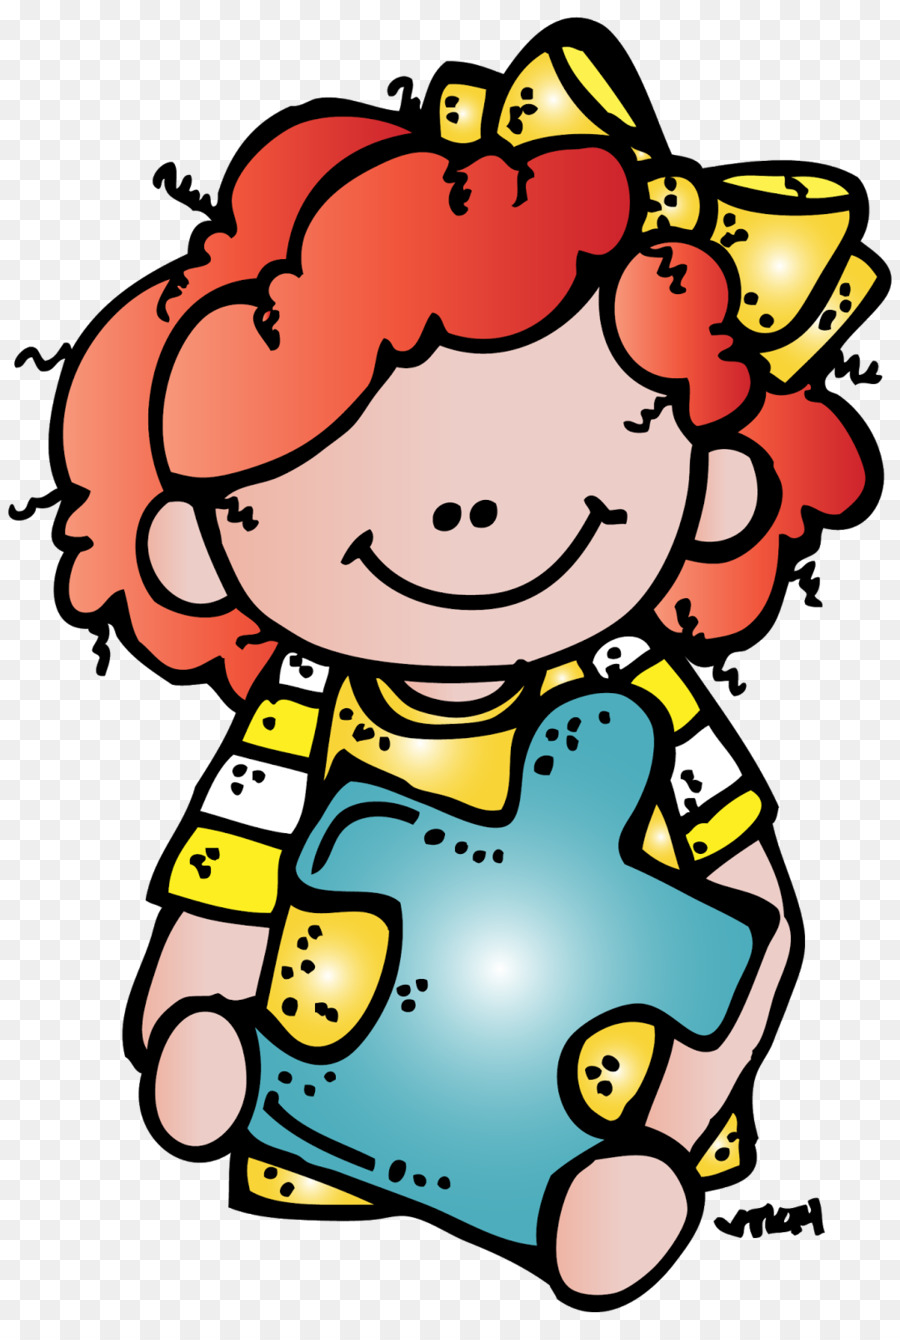 Summer happiness clipart.